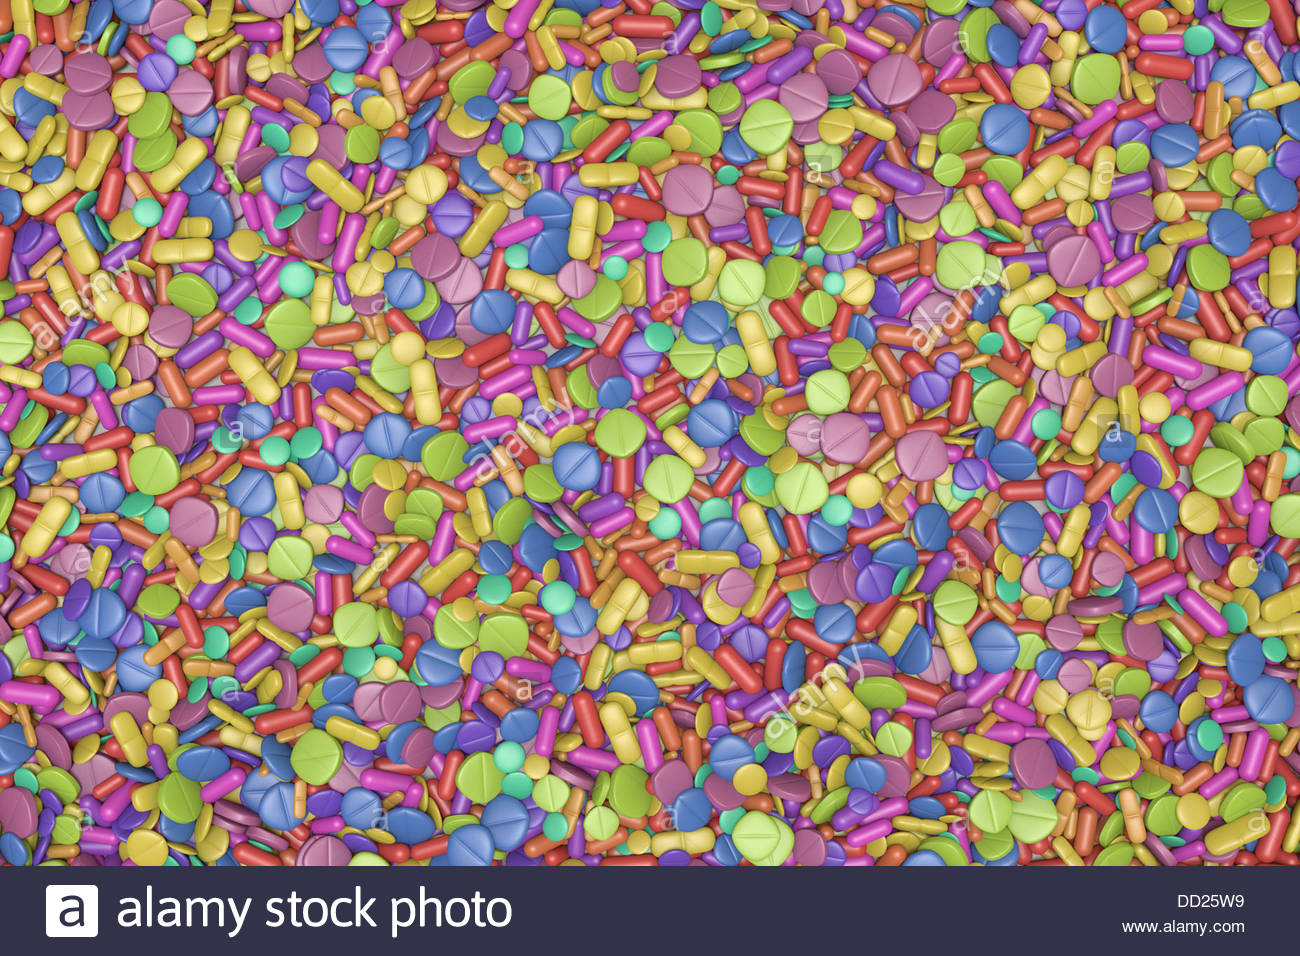 Wallpaper Of Colorful Drugs And Pills Stock Photo